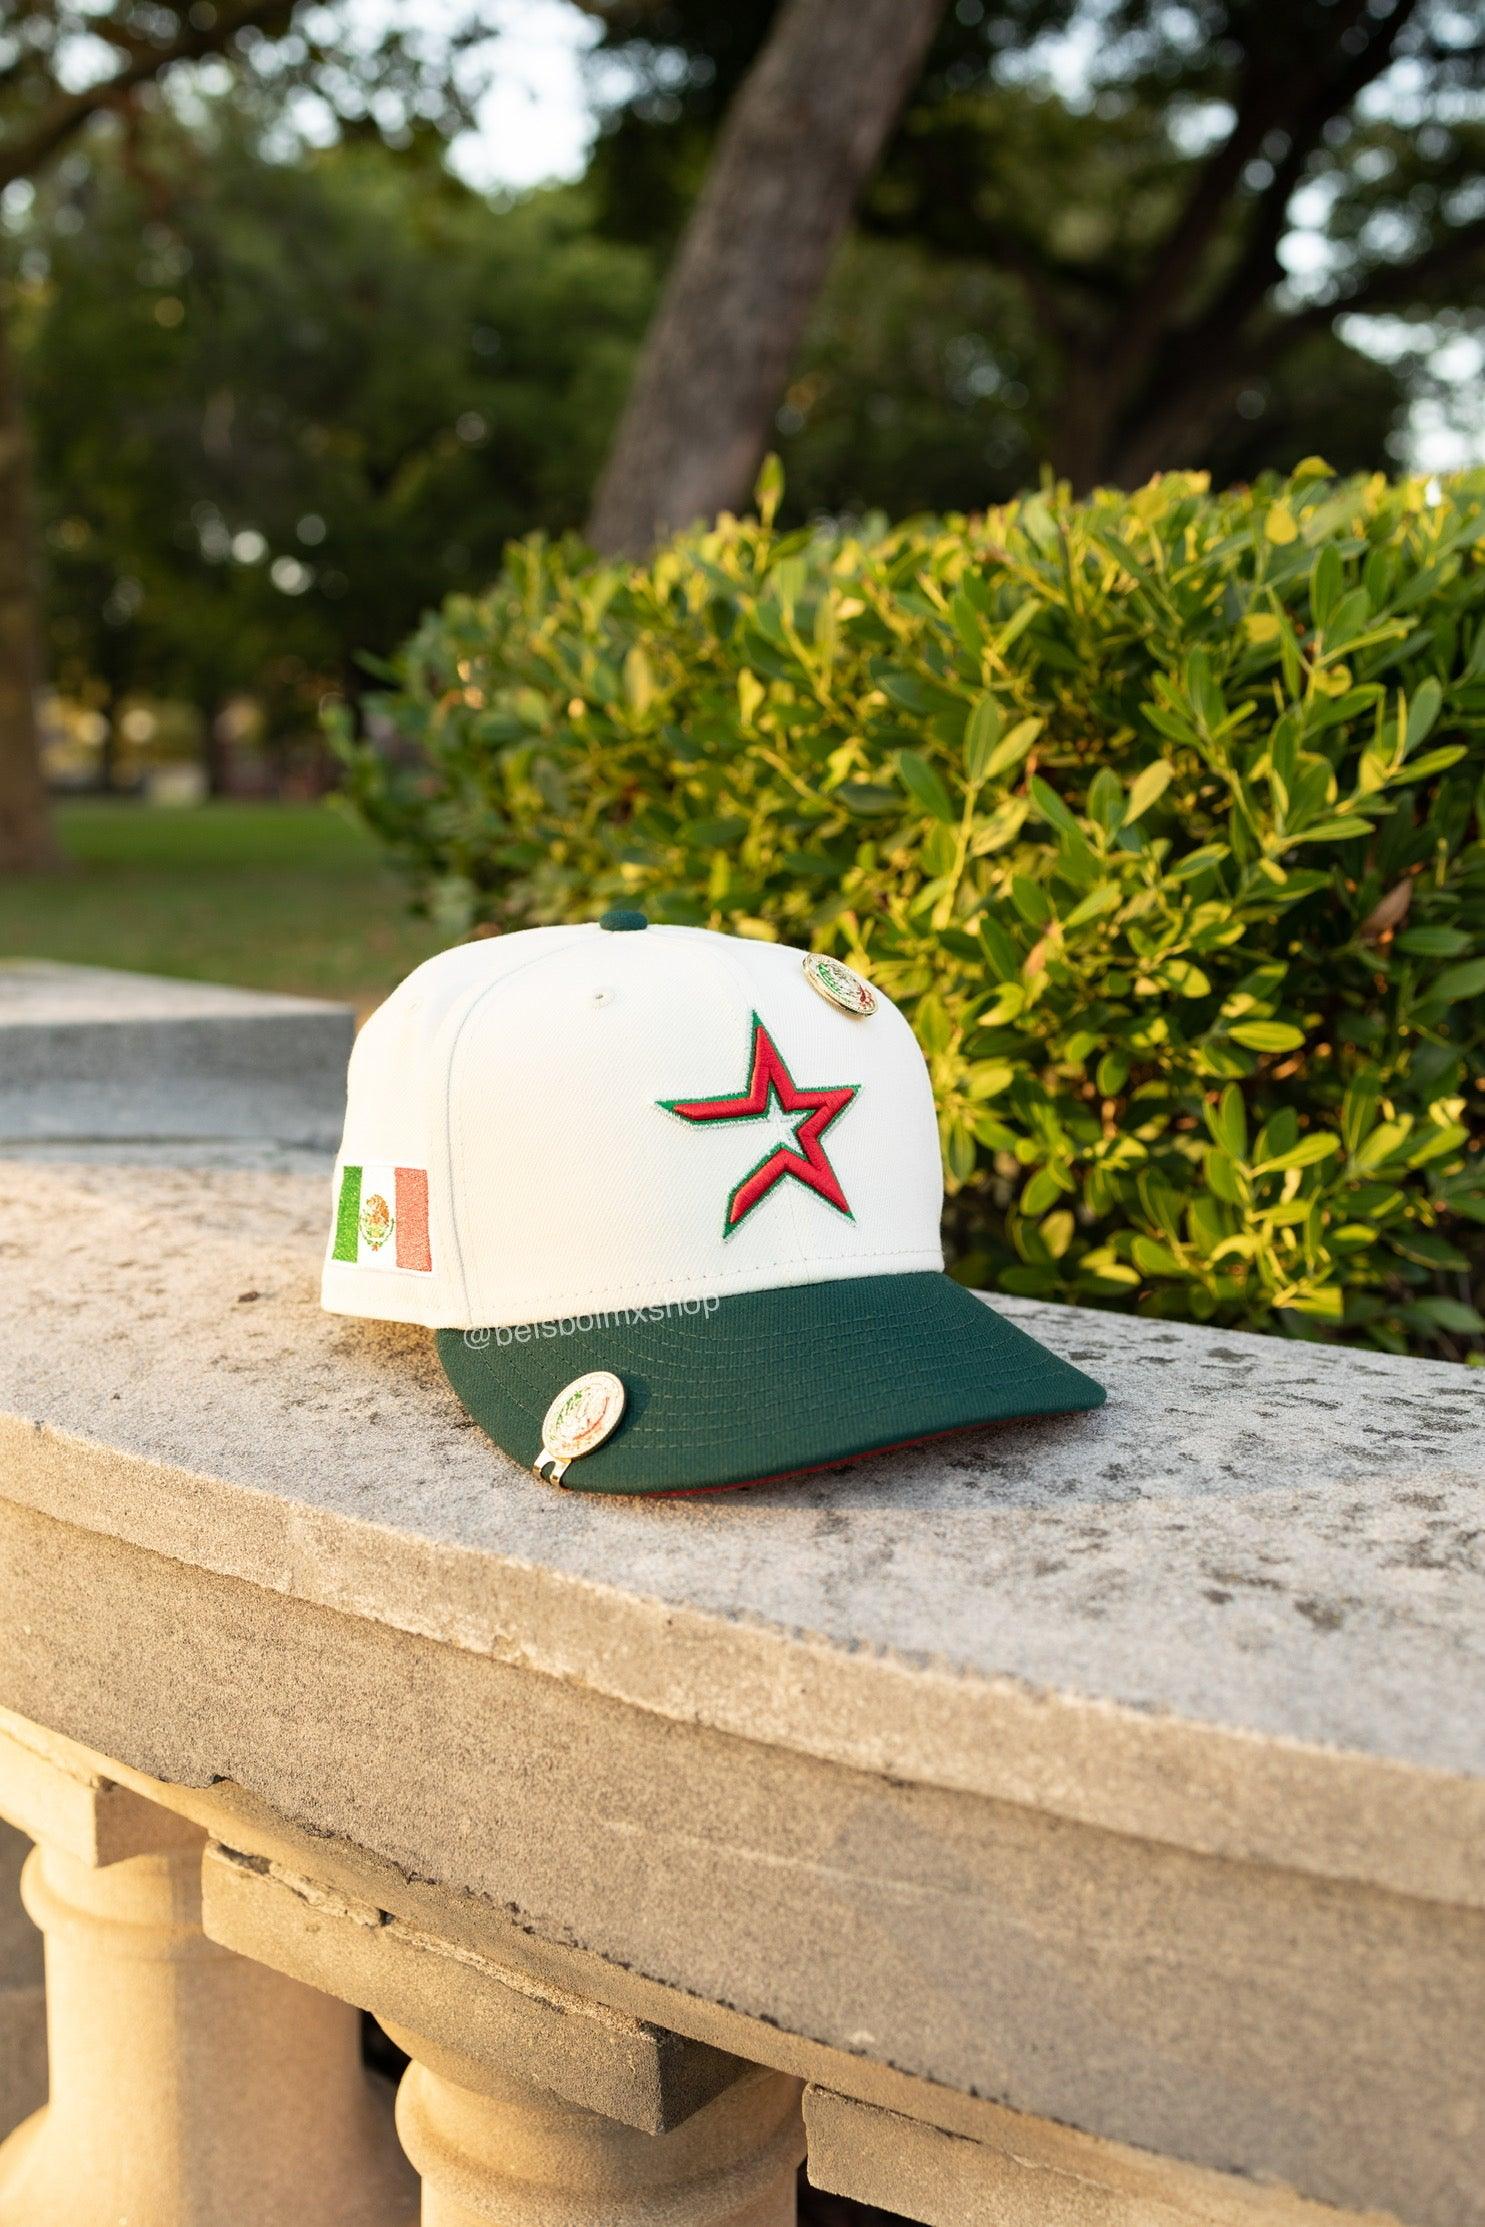 New Era, 59Fifty Fitted Hat, Houston Astros, Mexican Flag Size 7 3/4